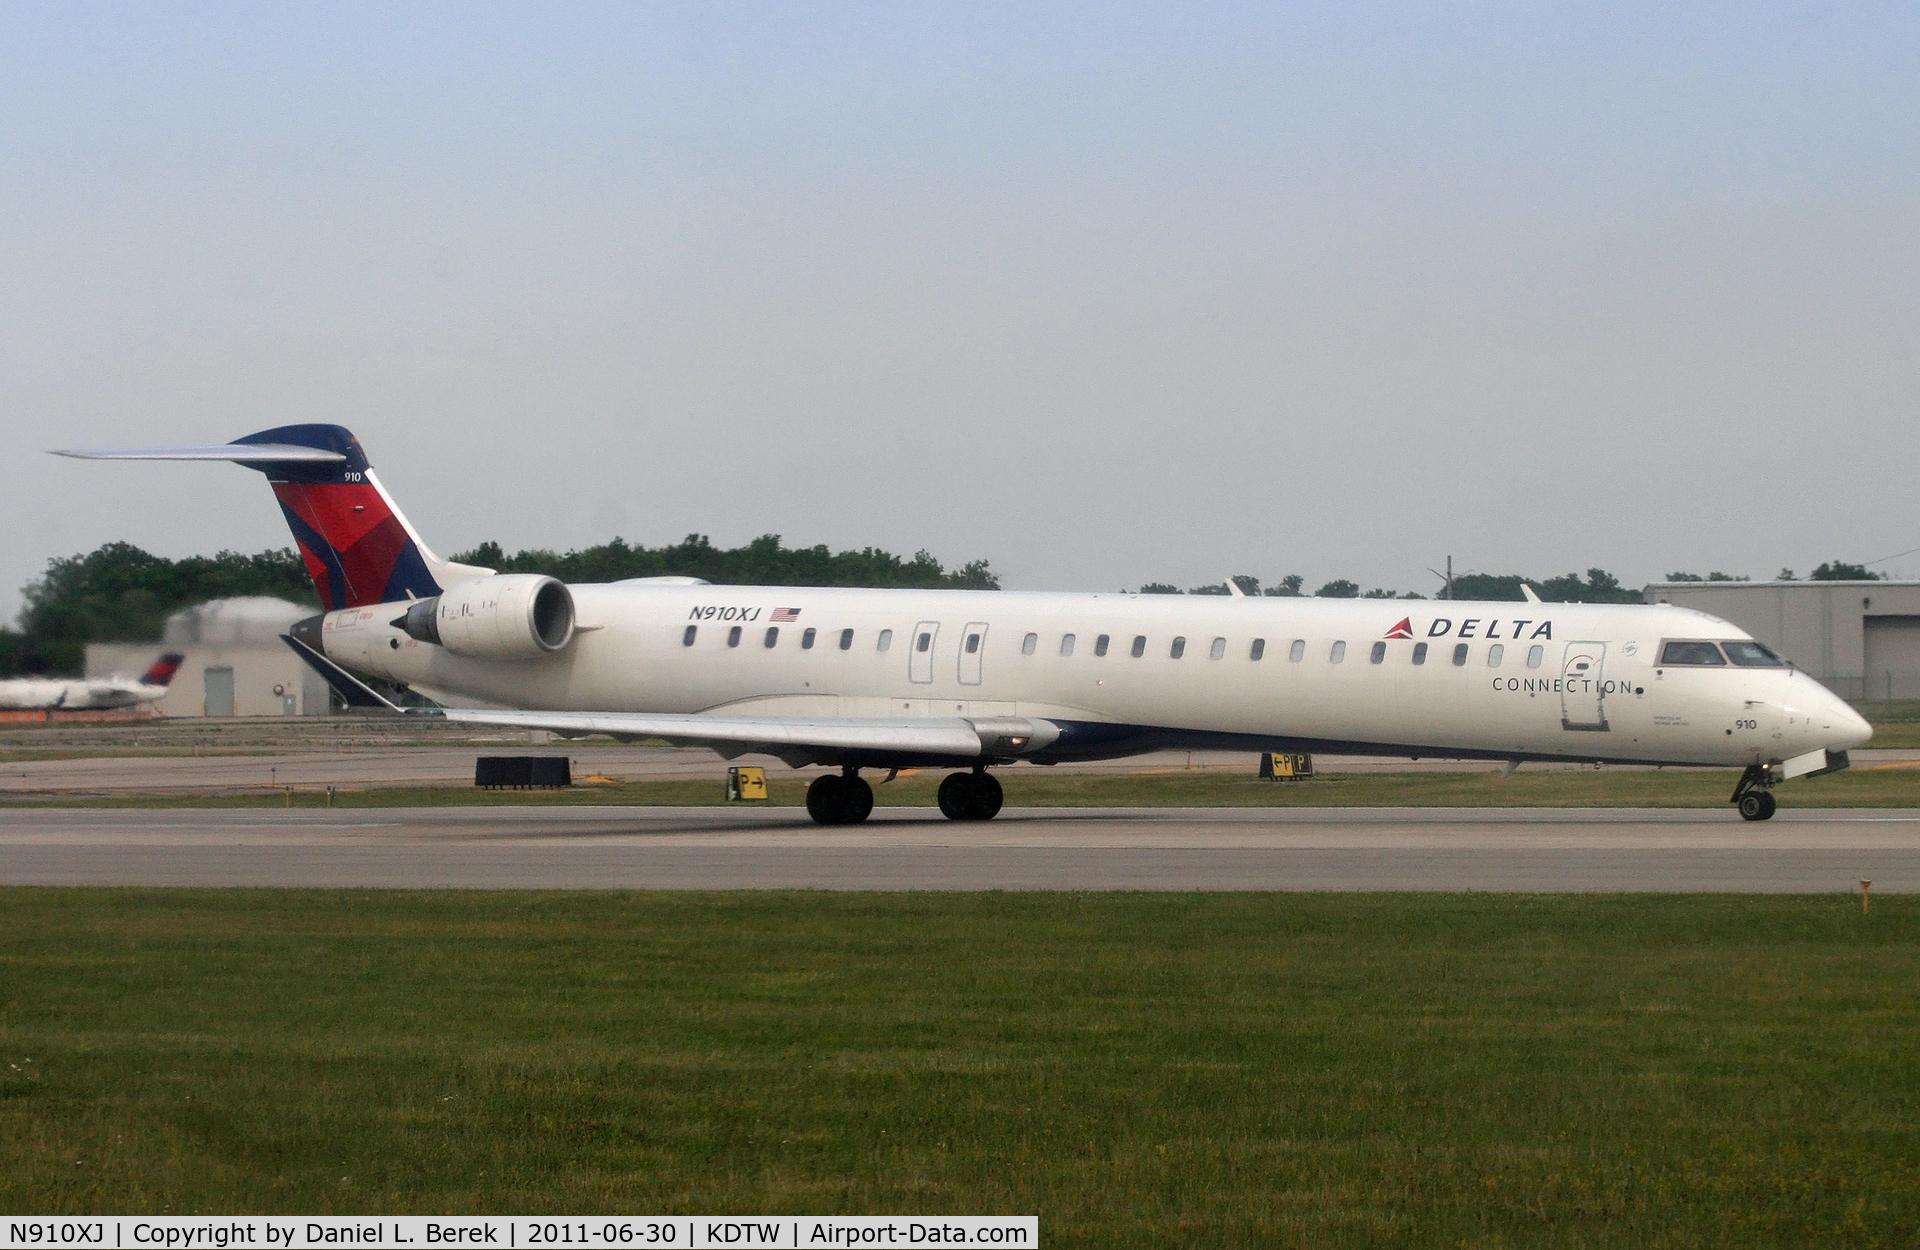 N910XJ, 2007 Bombardier CRJ-900ER (CL-600-2D24) C/N 15143, A Delta CRJ finds its way to its gate at DTW.